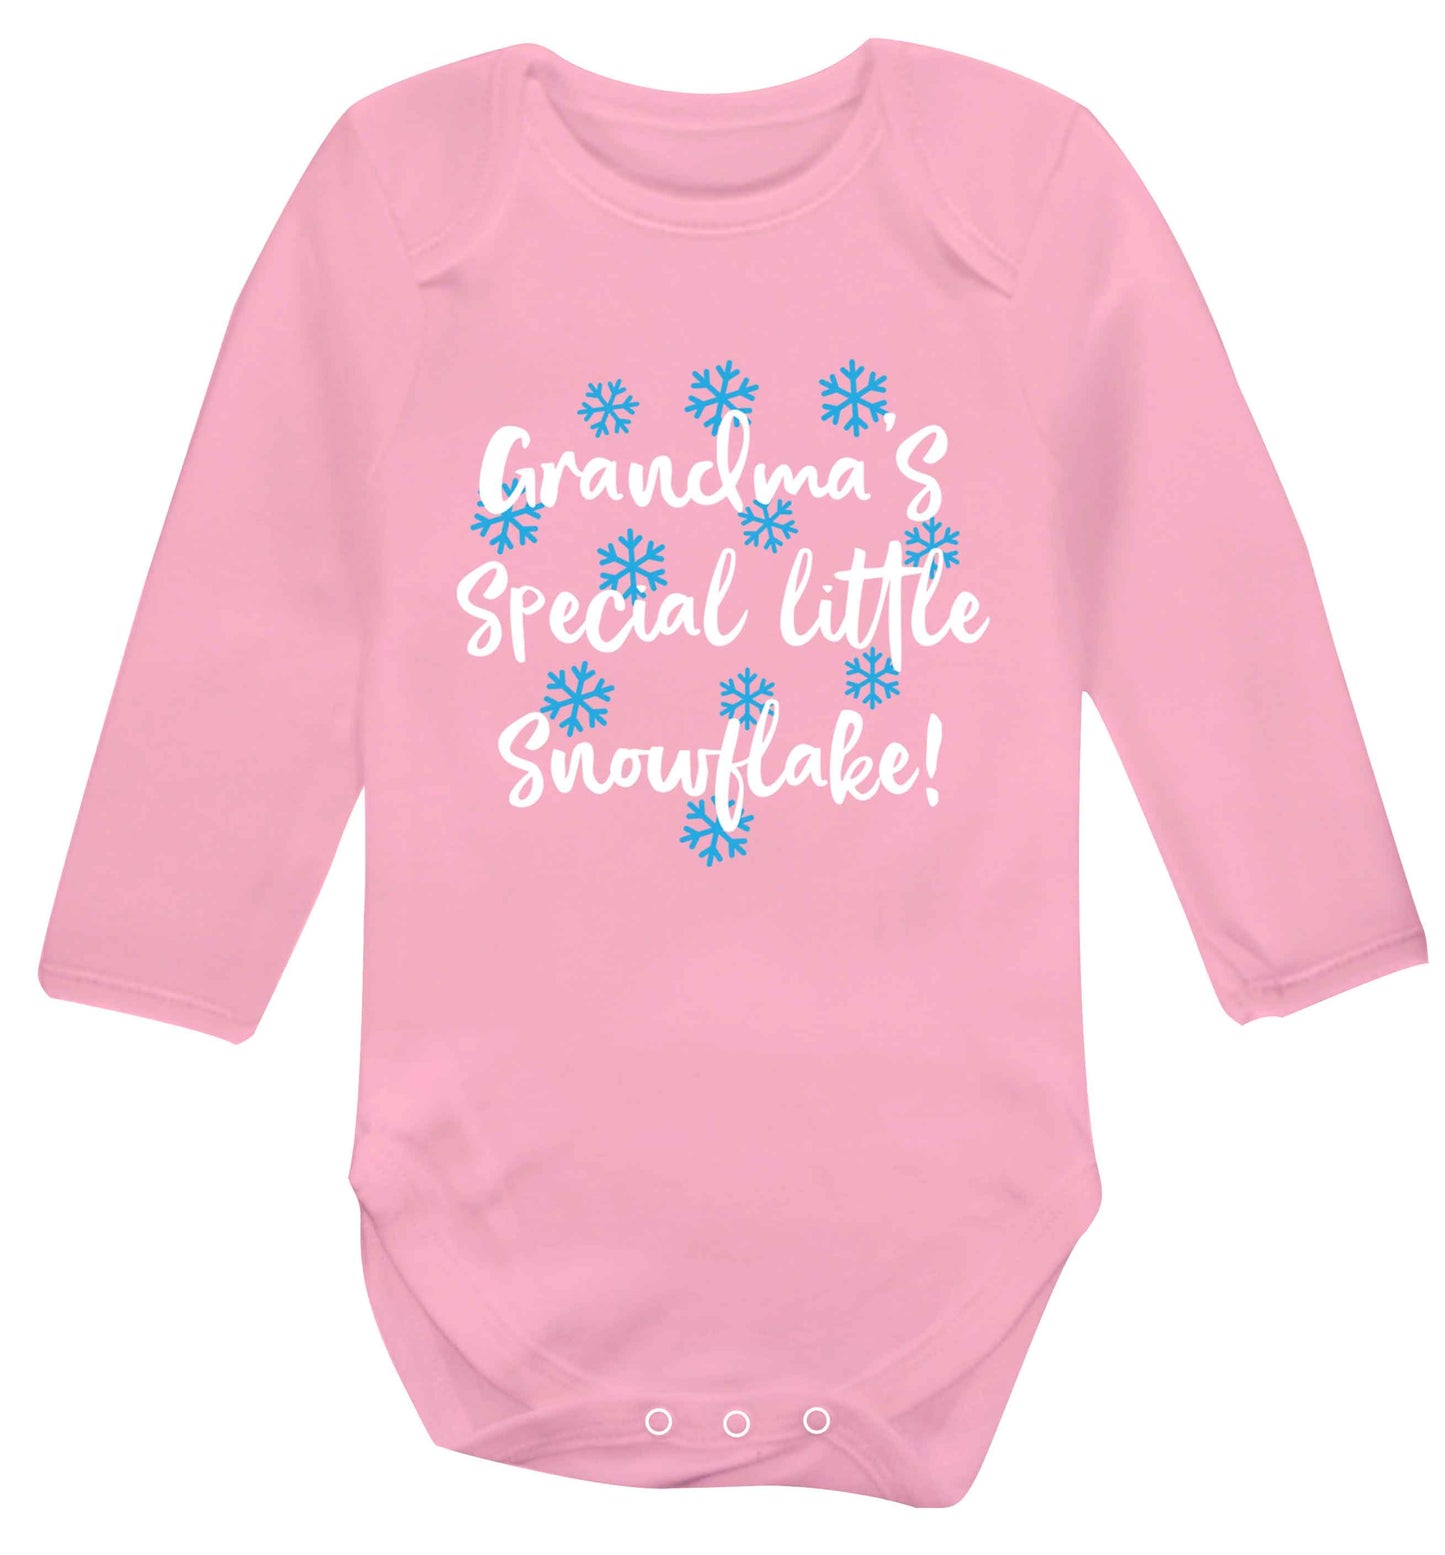 Grandma's special little snowflake Baby Vest long sleeved pale pink 6-12 months